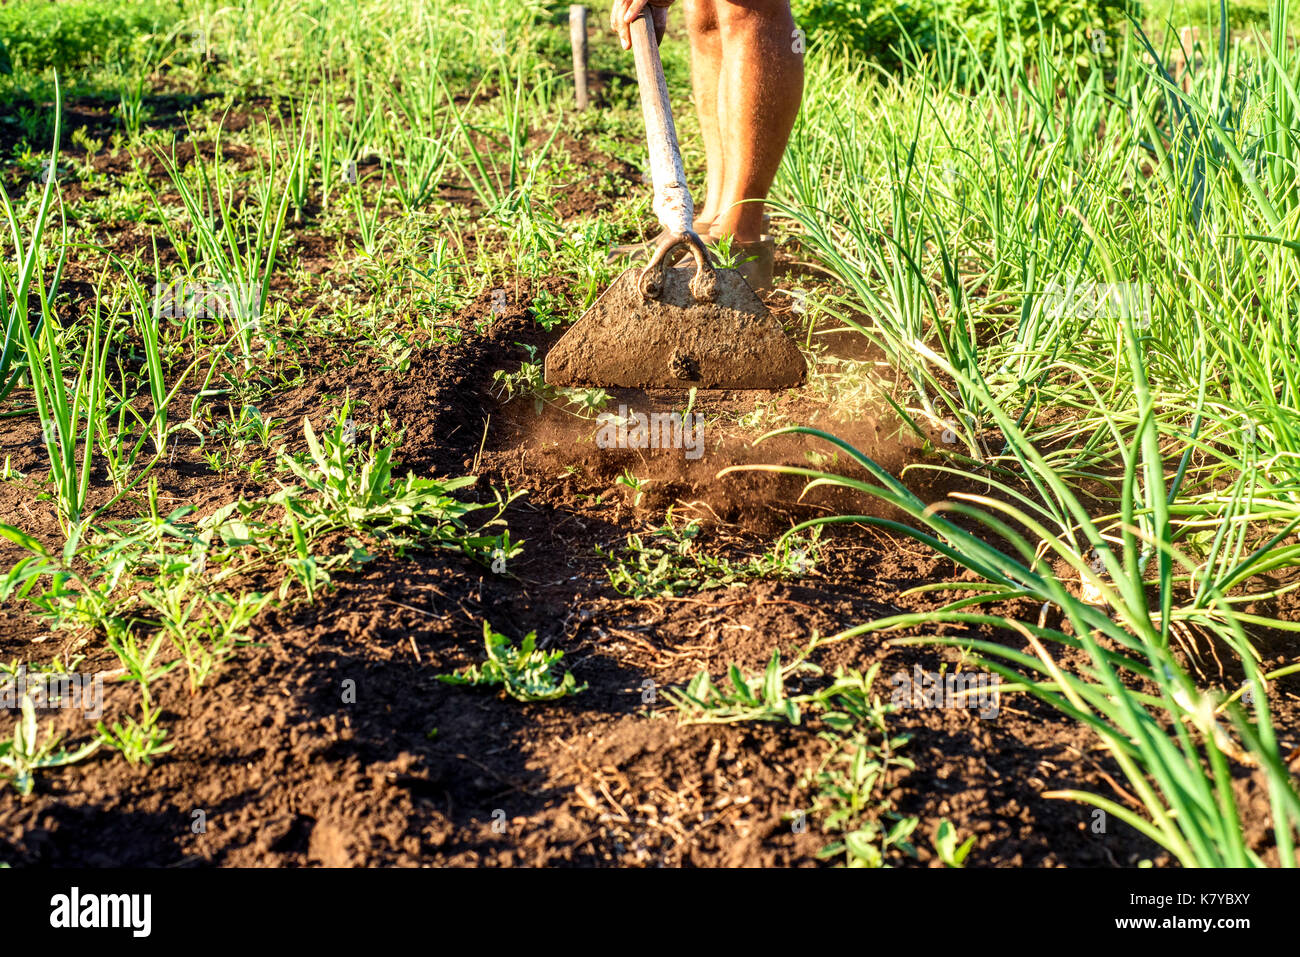 Legs of a man weeding a garden area with an old rustic hoe and green onion plants at the edge Stock Photo